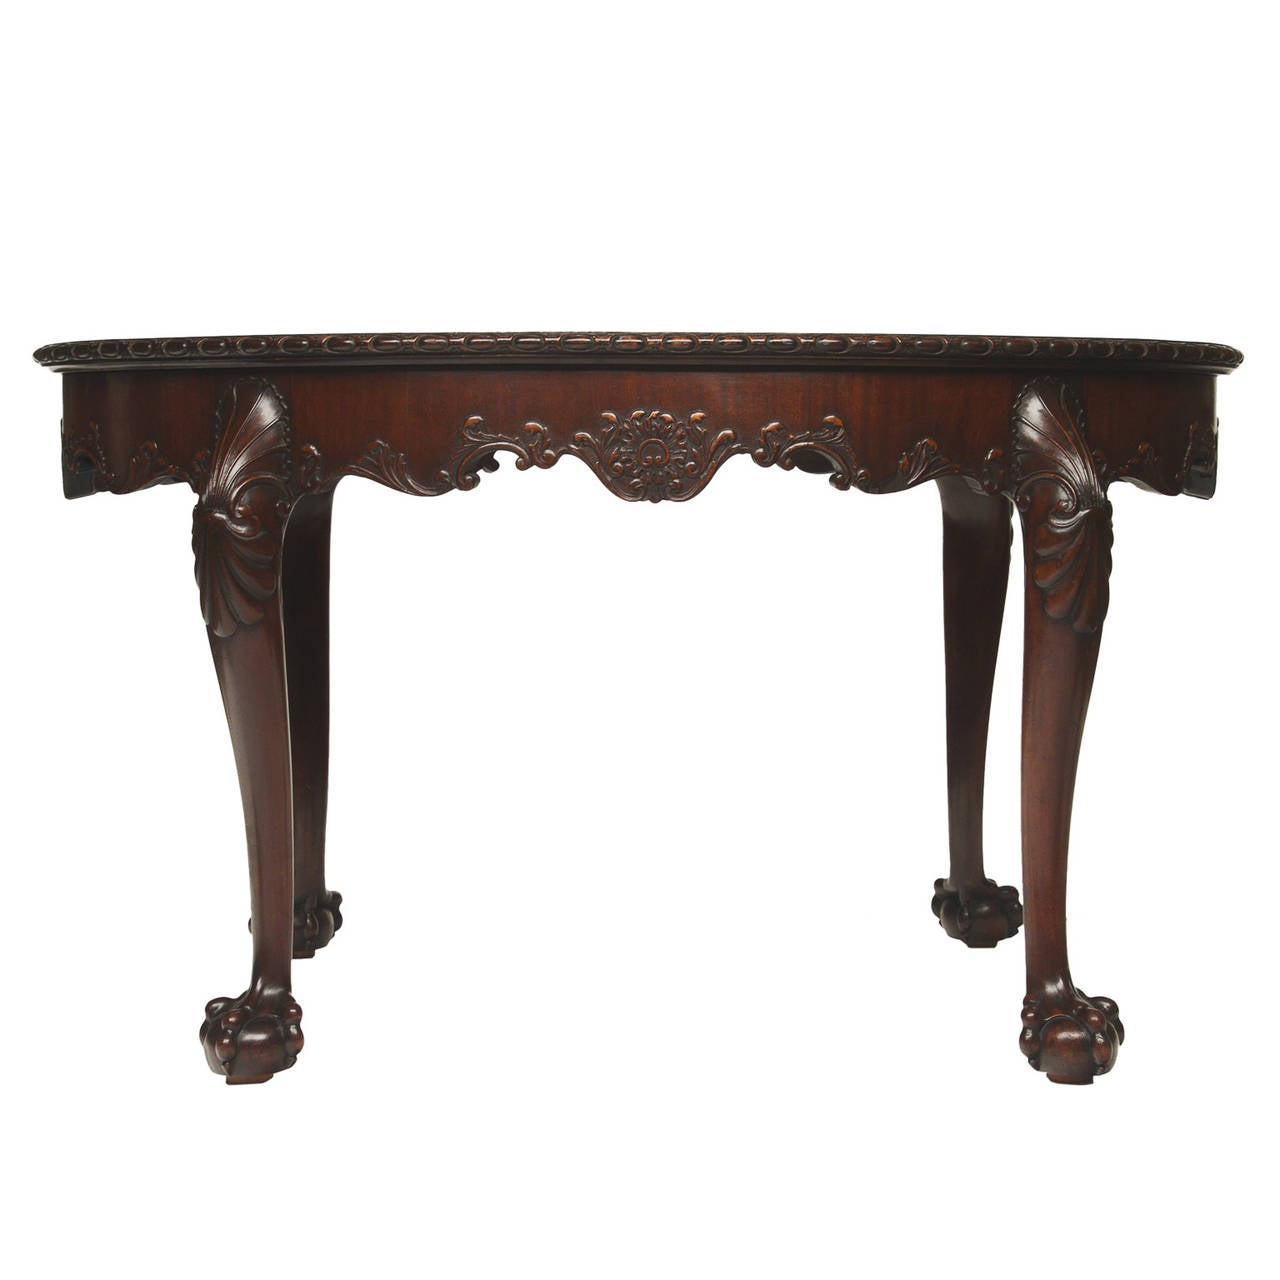 A handsome English Chippendale Mahogany oval center table from the 19th century. This table is a fine example of the Chippendale style. Beautiful flamed mahogany top and banded with crotch mahogany. There is a detailed and fine carved egg and dart